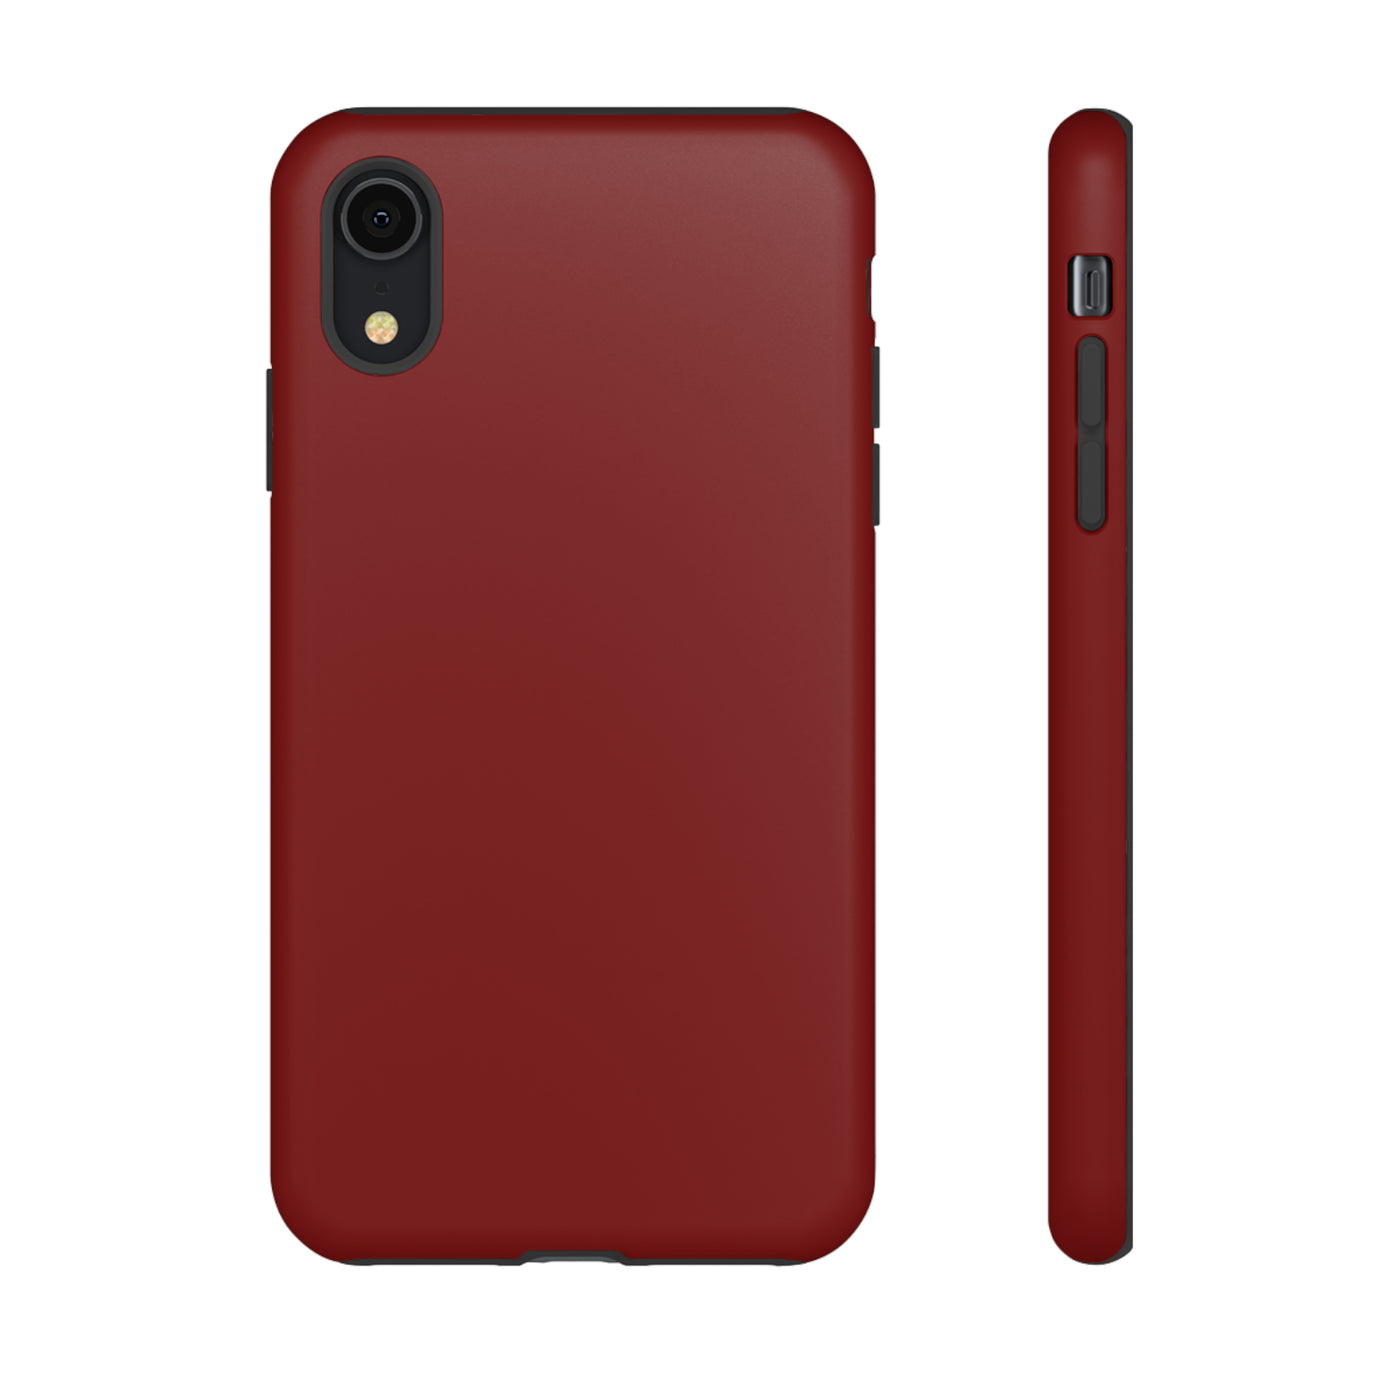 Cool IPhone Case | Earth Red, iPhone 15 Case | iPhone 15 Pro Case, Iphone 14 Case, Iphone 14 Pro Max Case, Protective Iphone Case